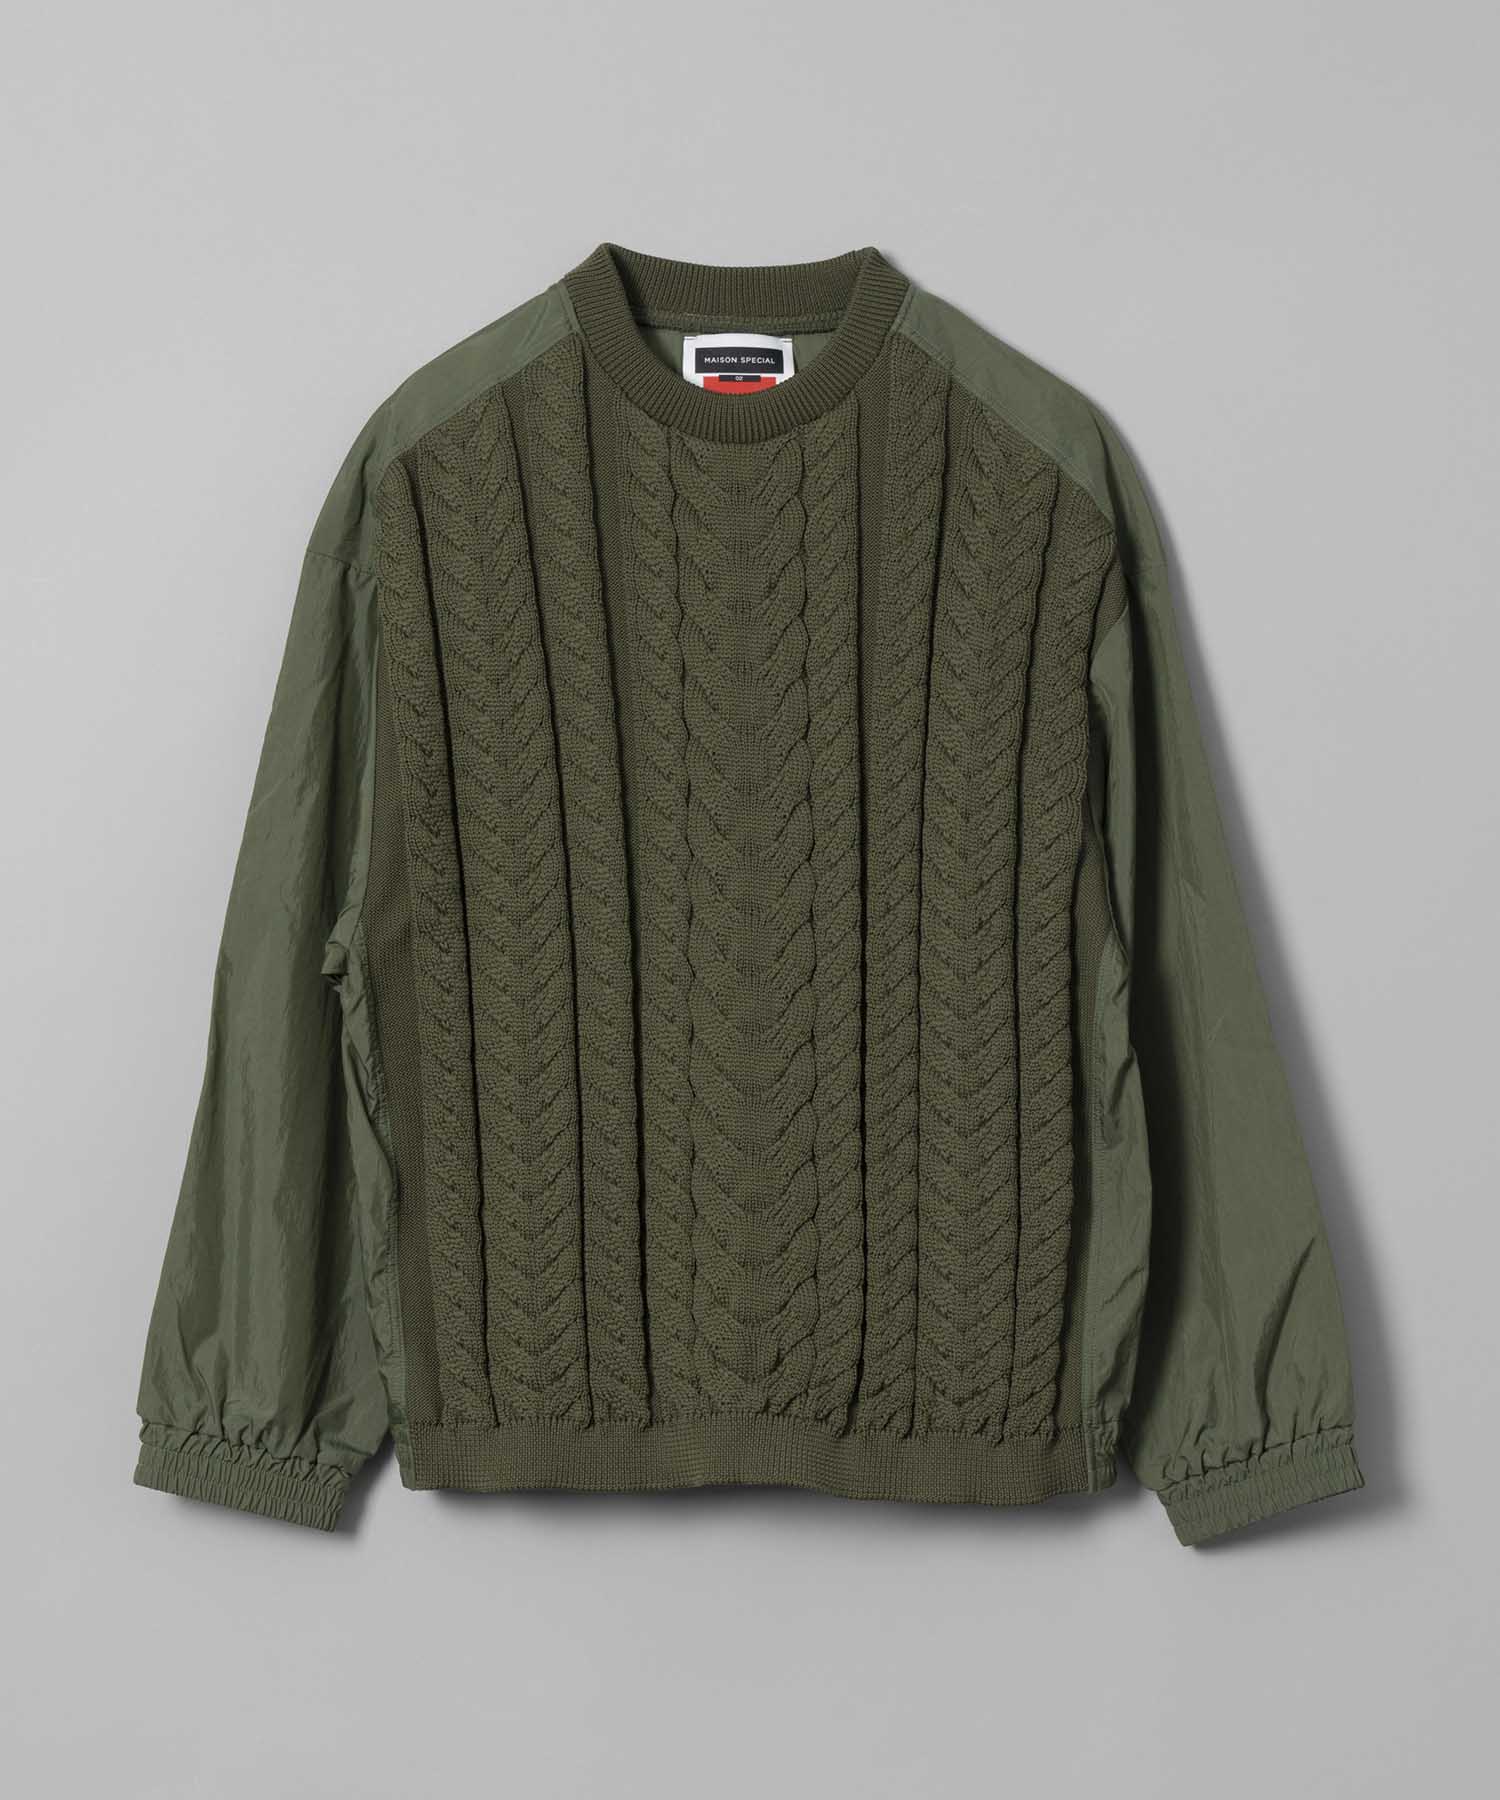 Cable Knit Combination Prime-Over Woven Shirt Crew Neck Pullover